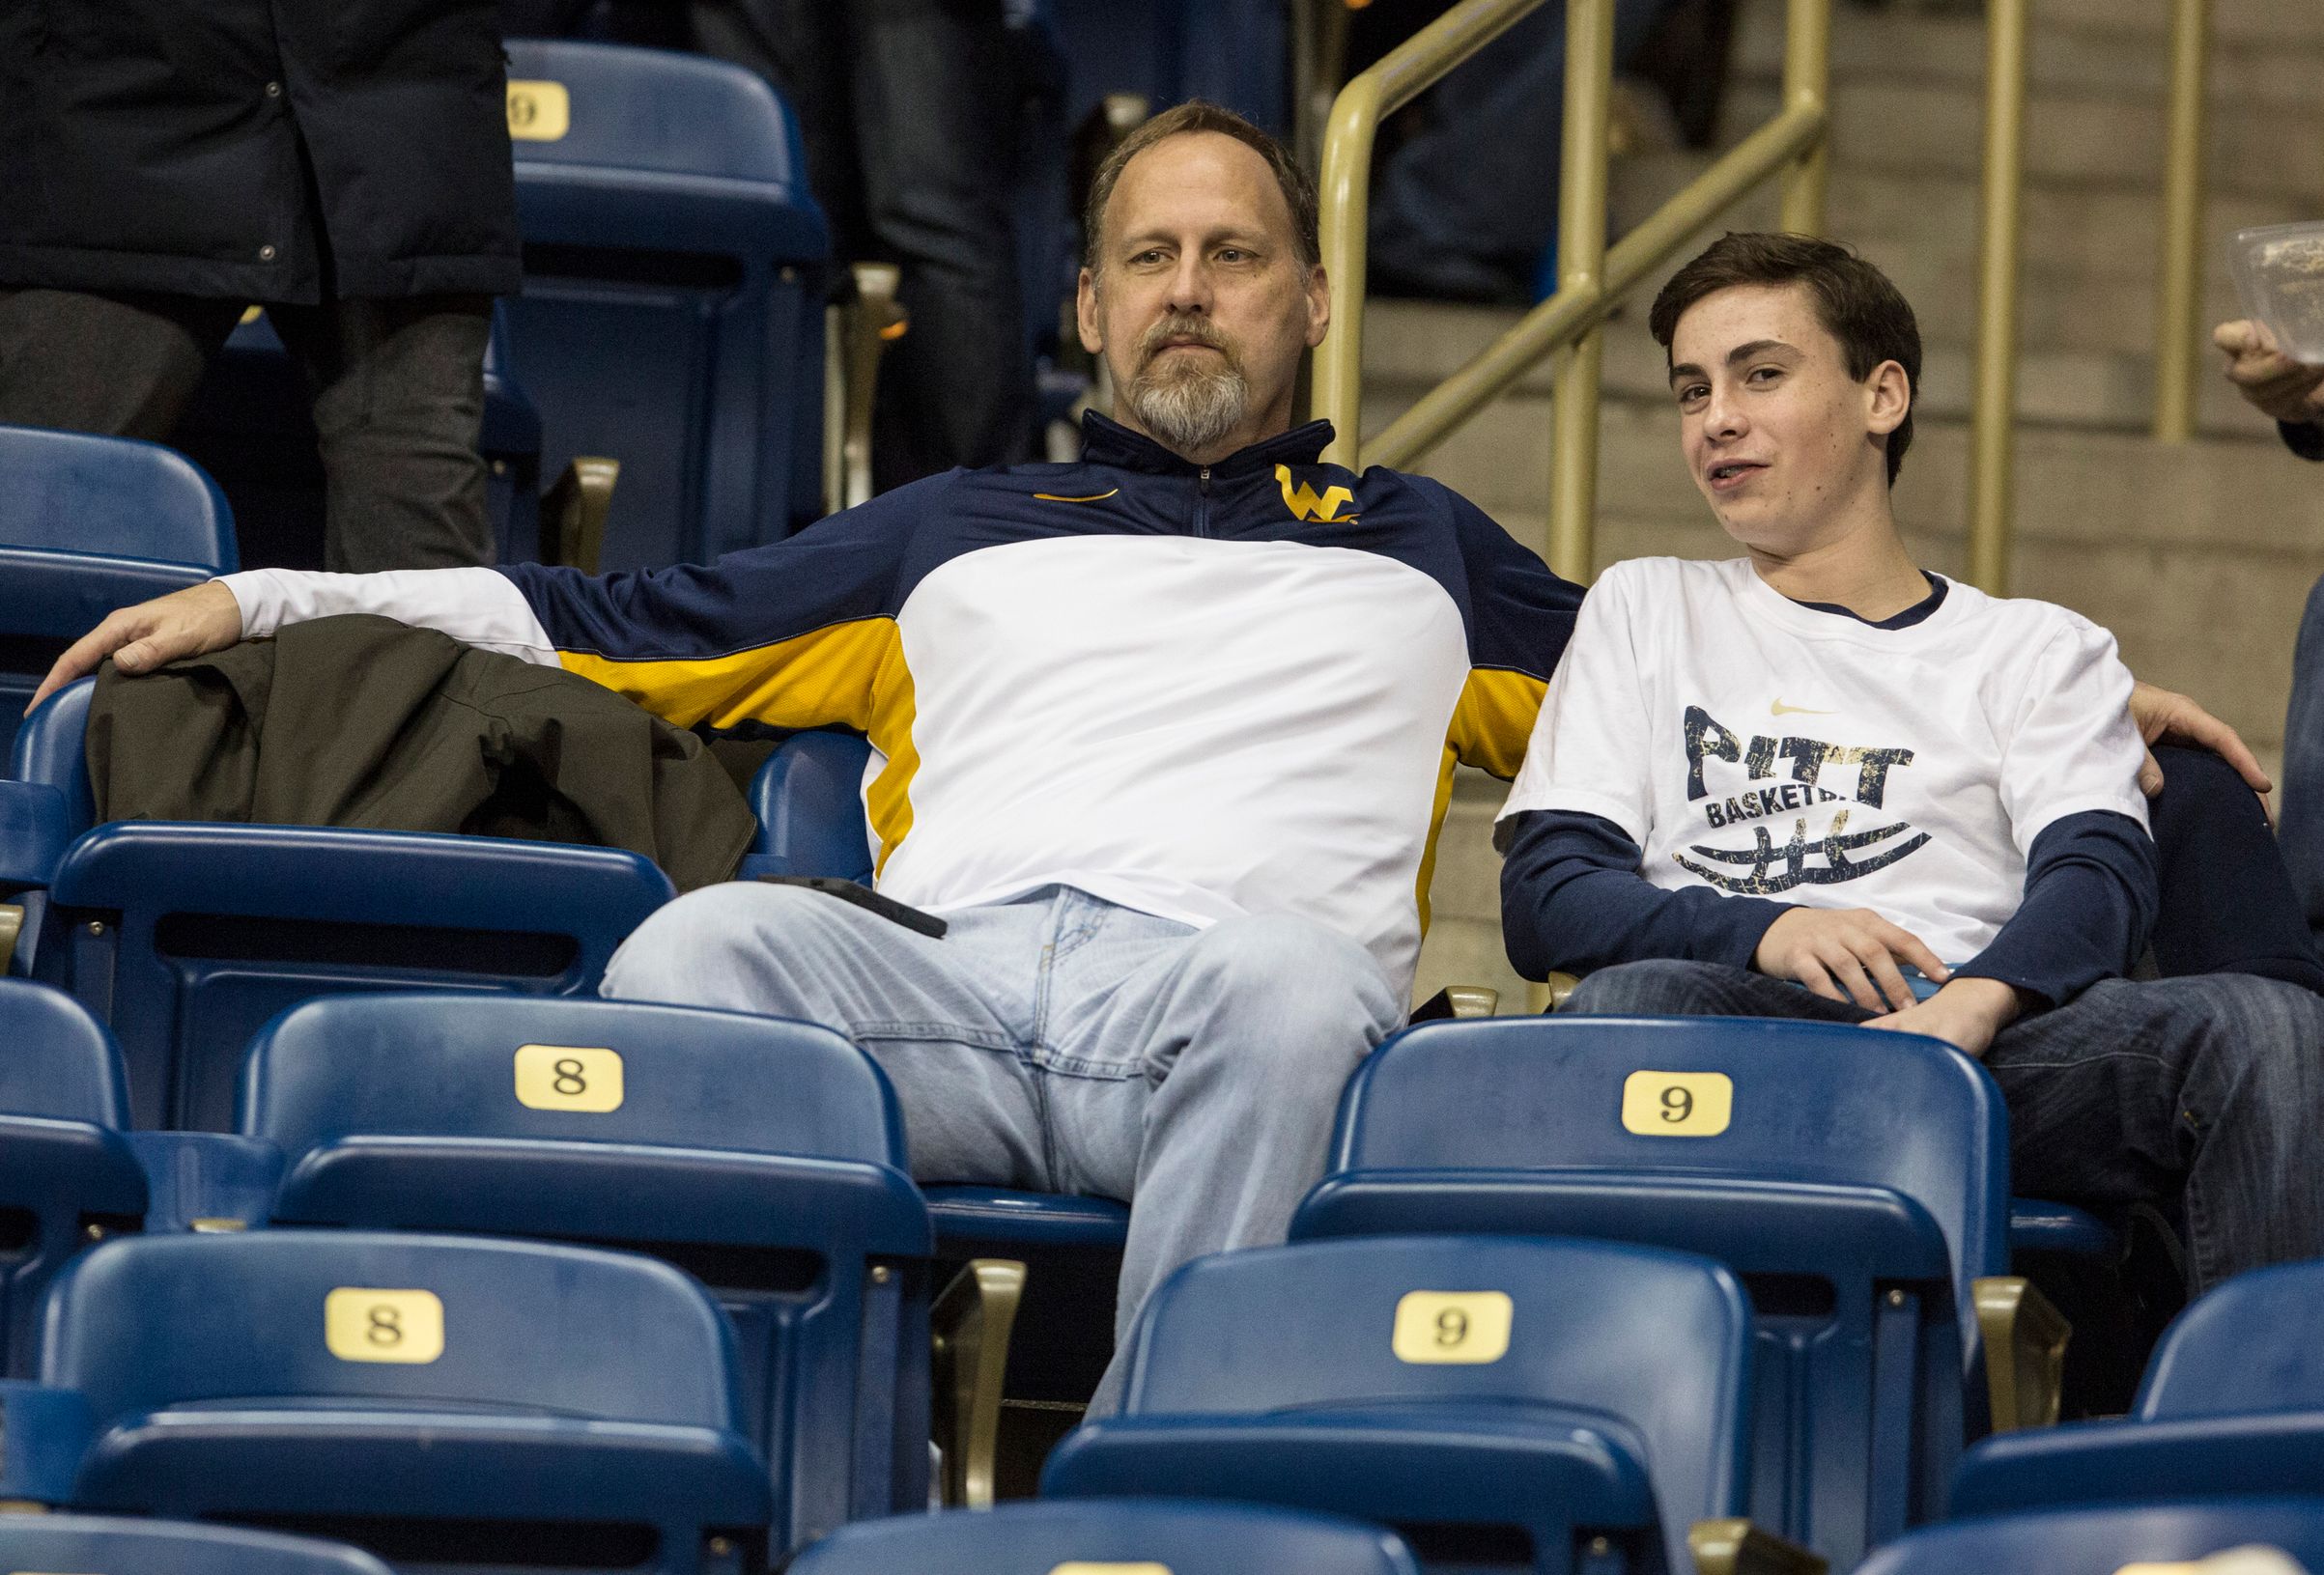 Pitt Game Father and Son